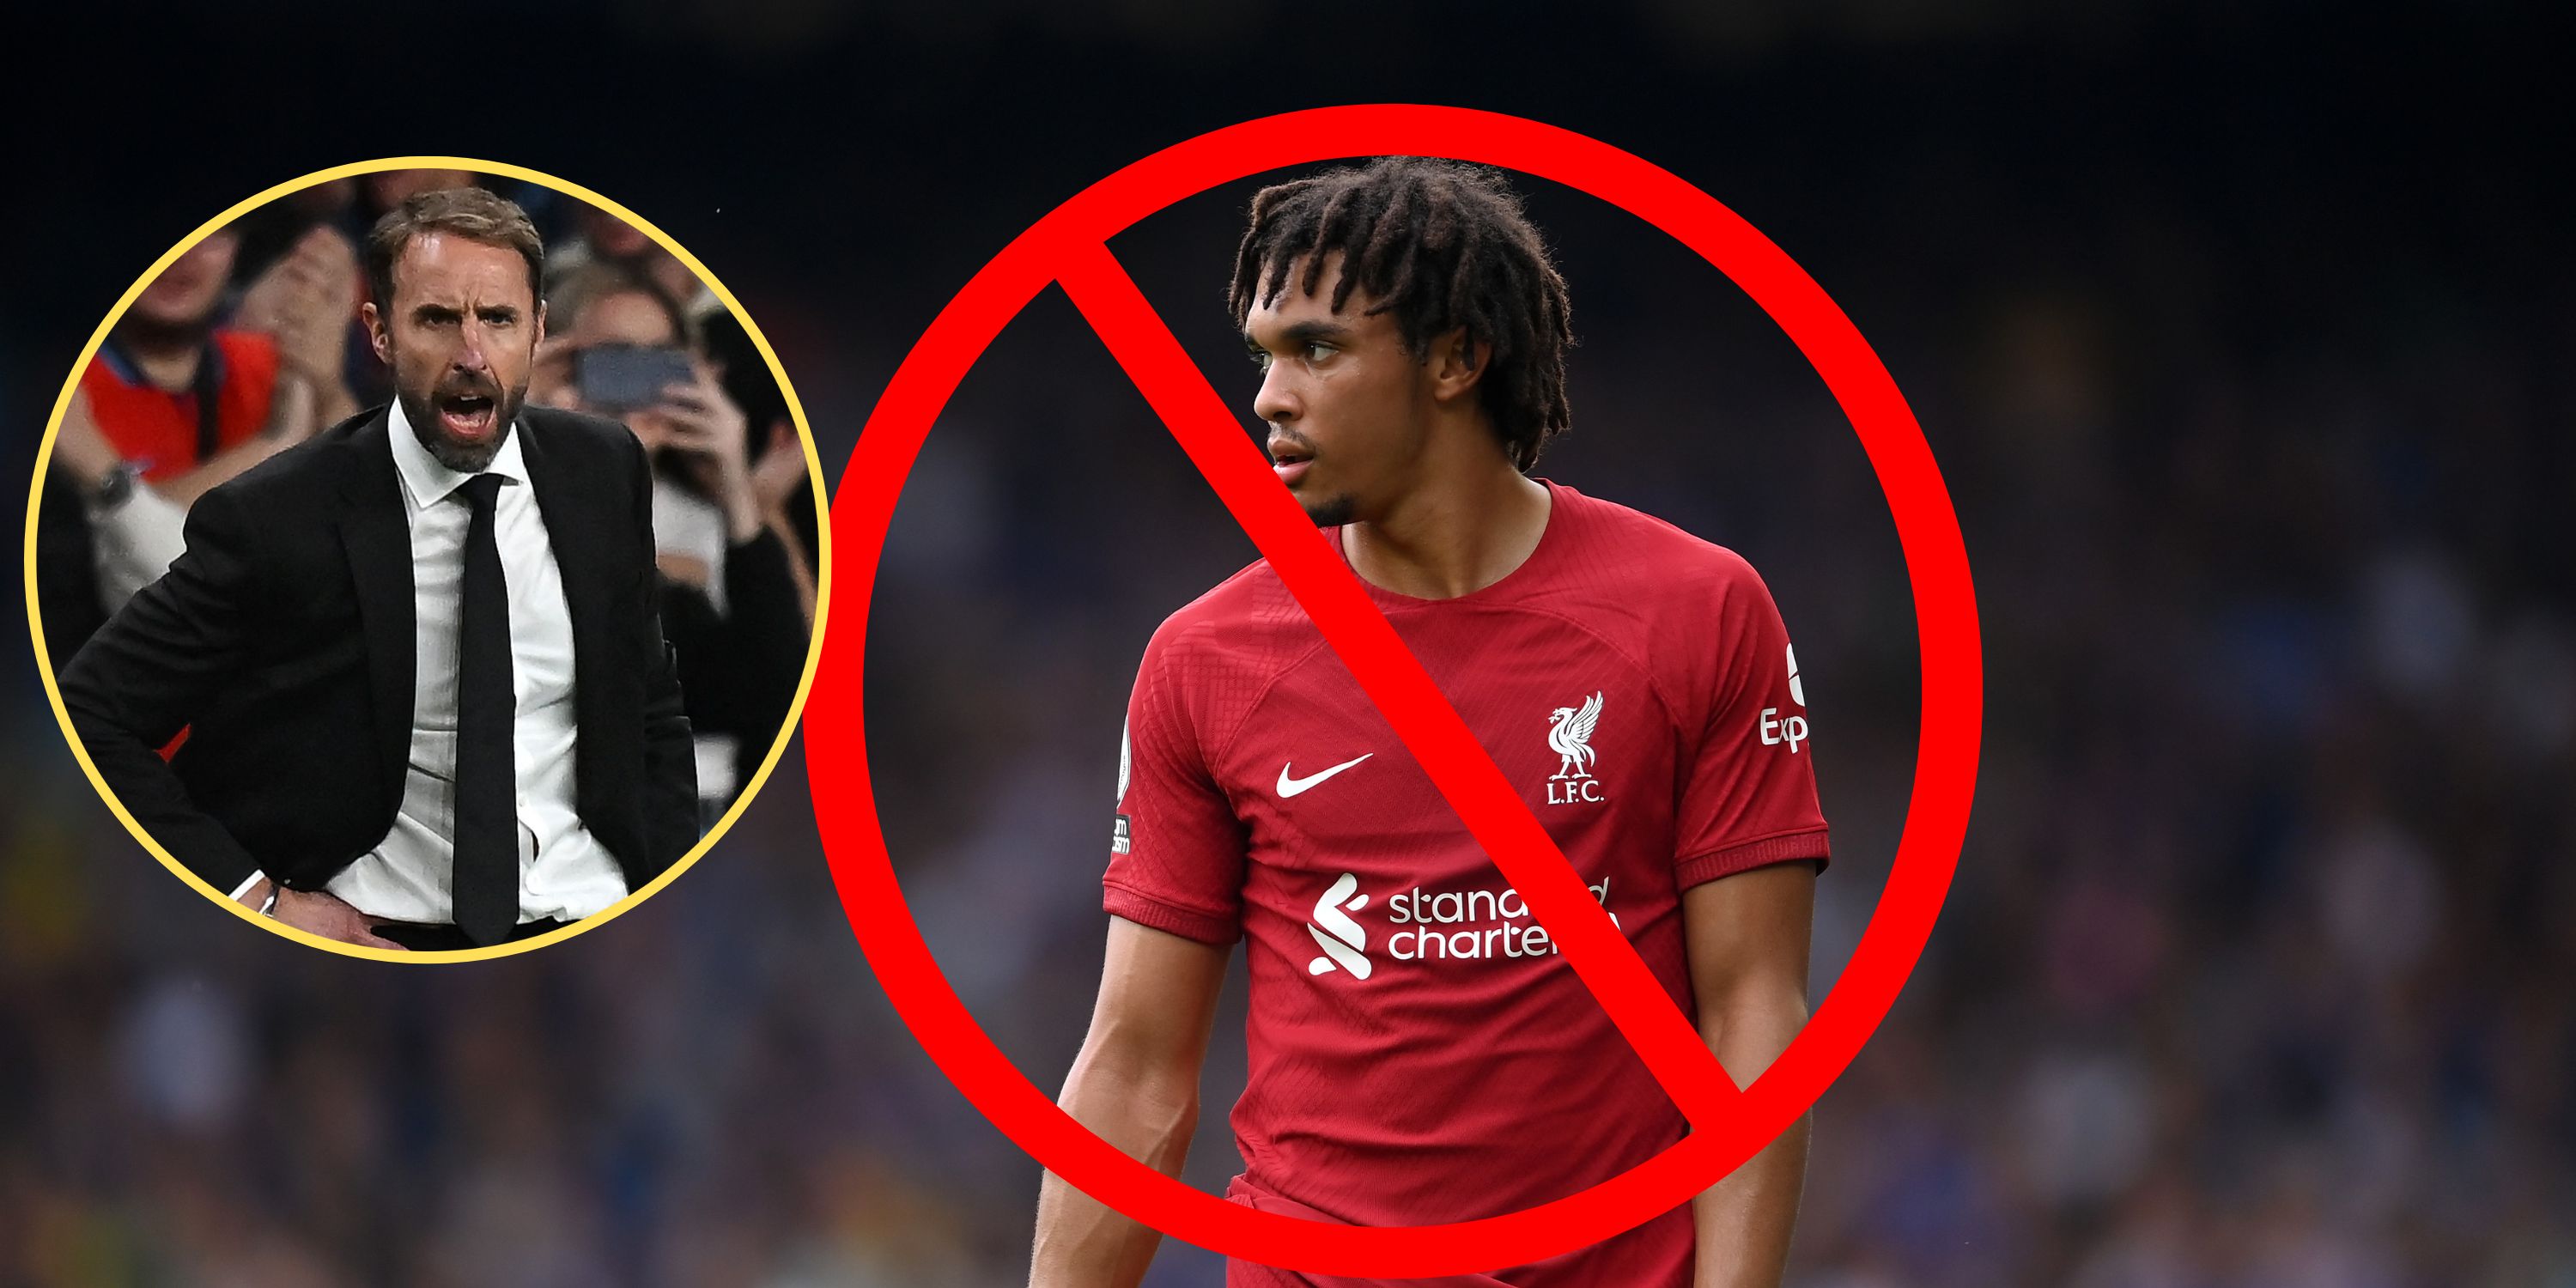 (Video) Southgate’s agenda against Trent clearly exposed by latest baffling comments – opinion